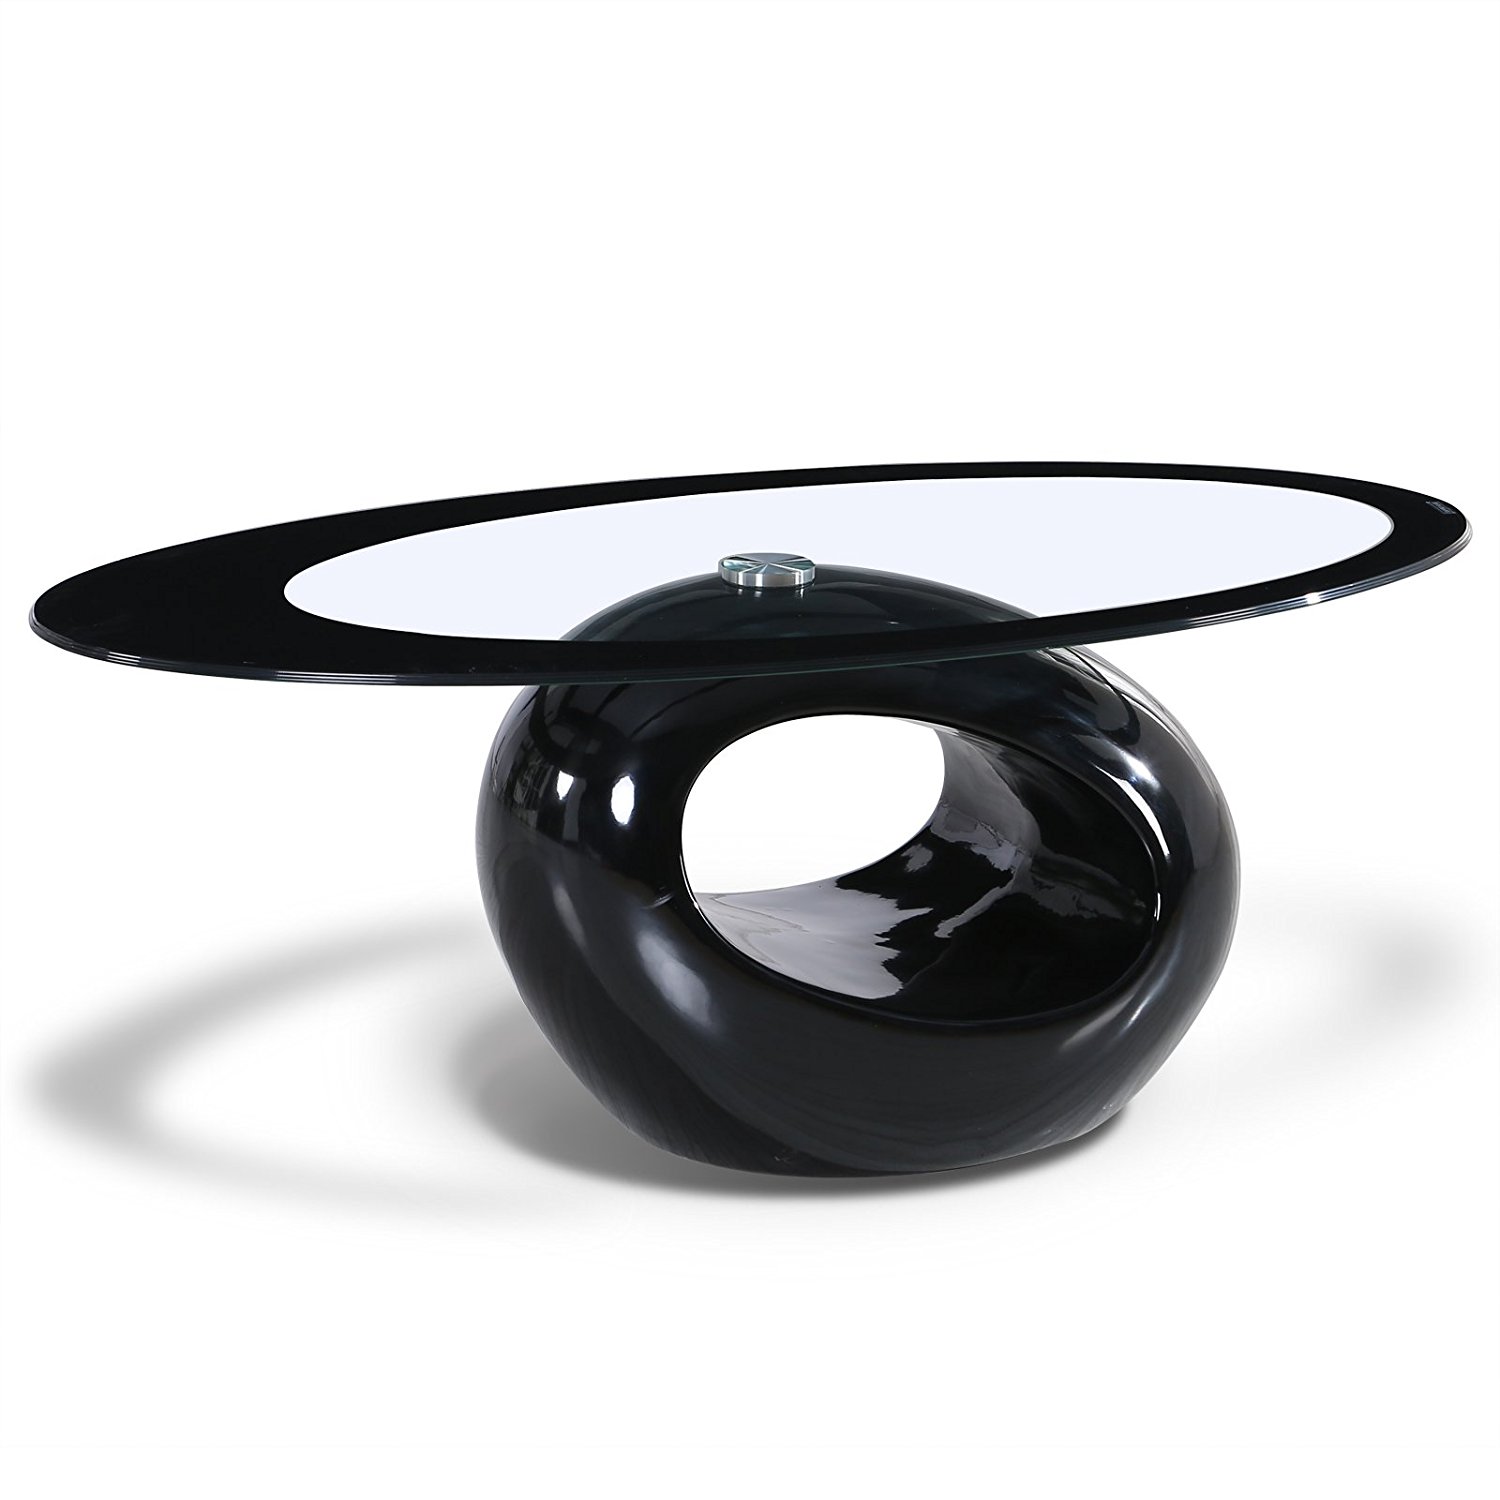 OFFICE MOREGlass Oval Coffee Table Contemporary Modern Design Living Room Furniture Black